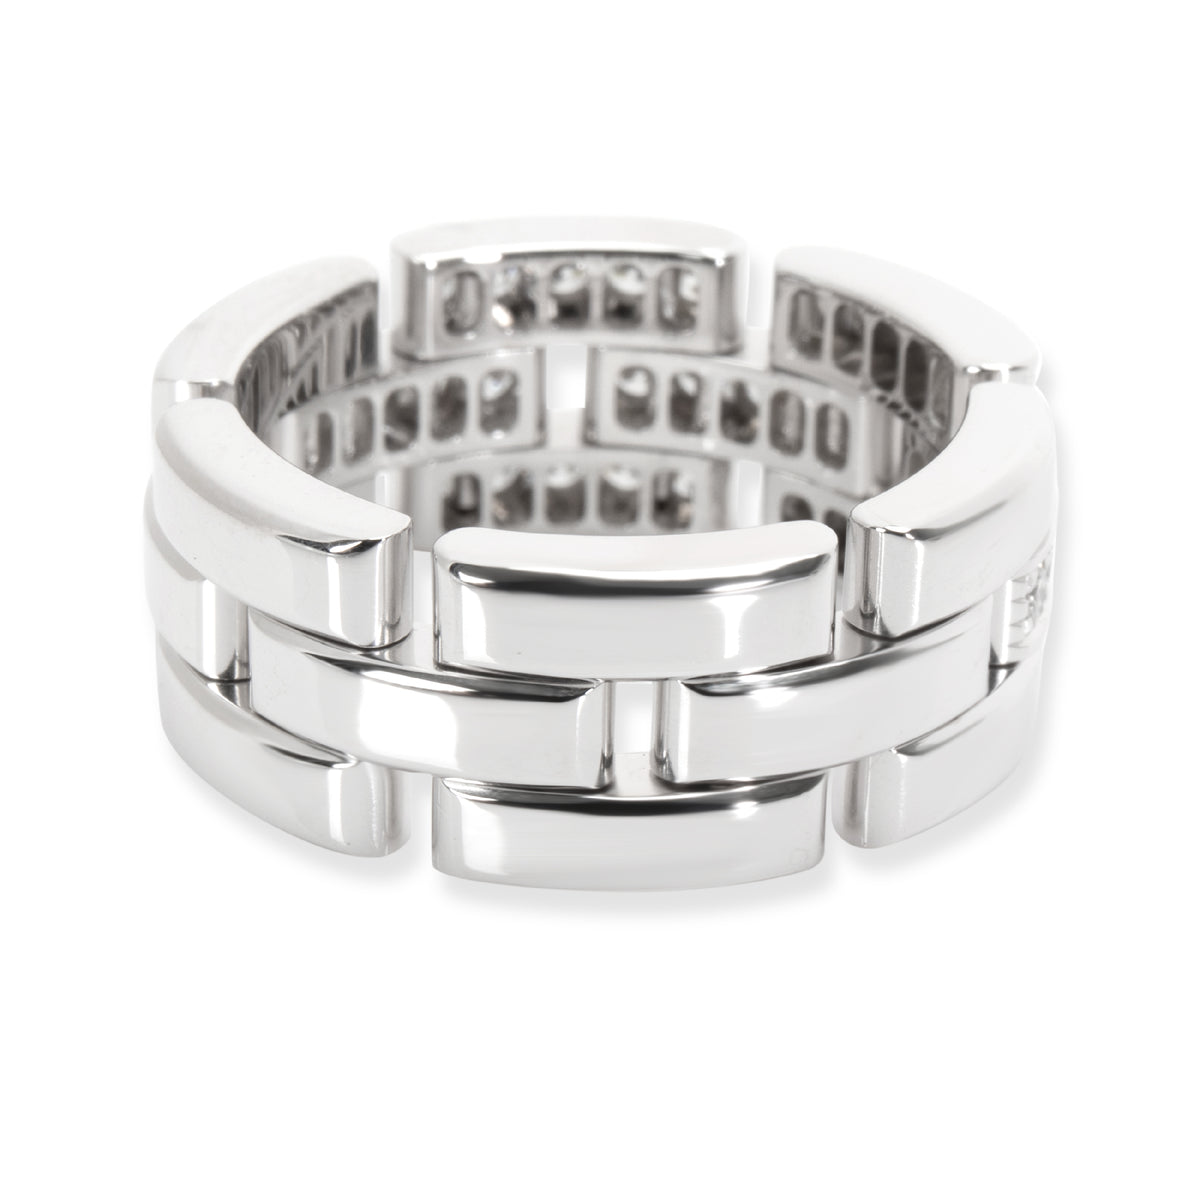 Cartier Maillon Panthere Band in 18KT White Gold 0.53 CTW